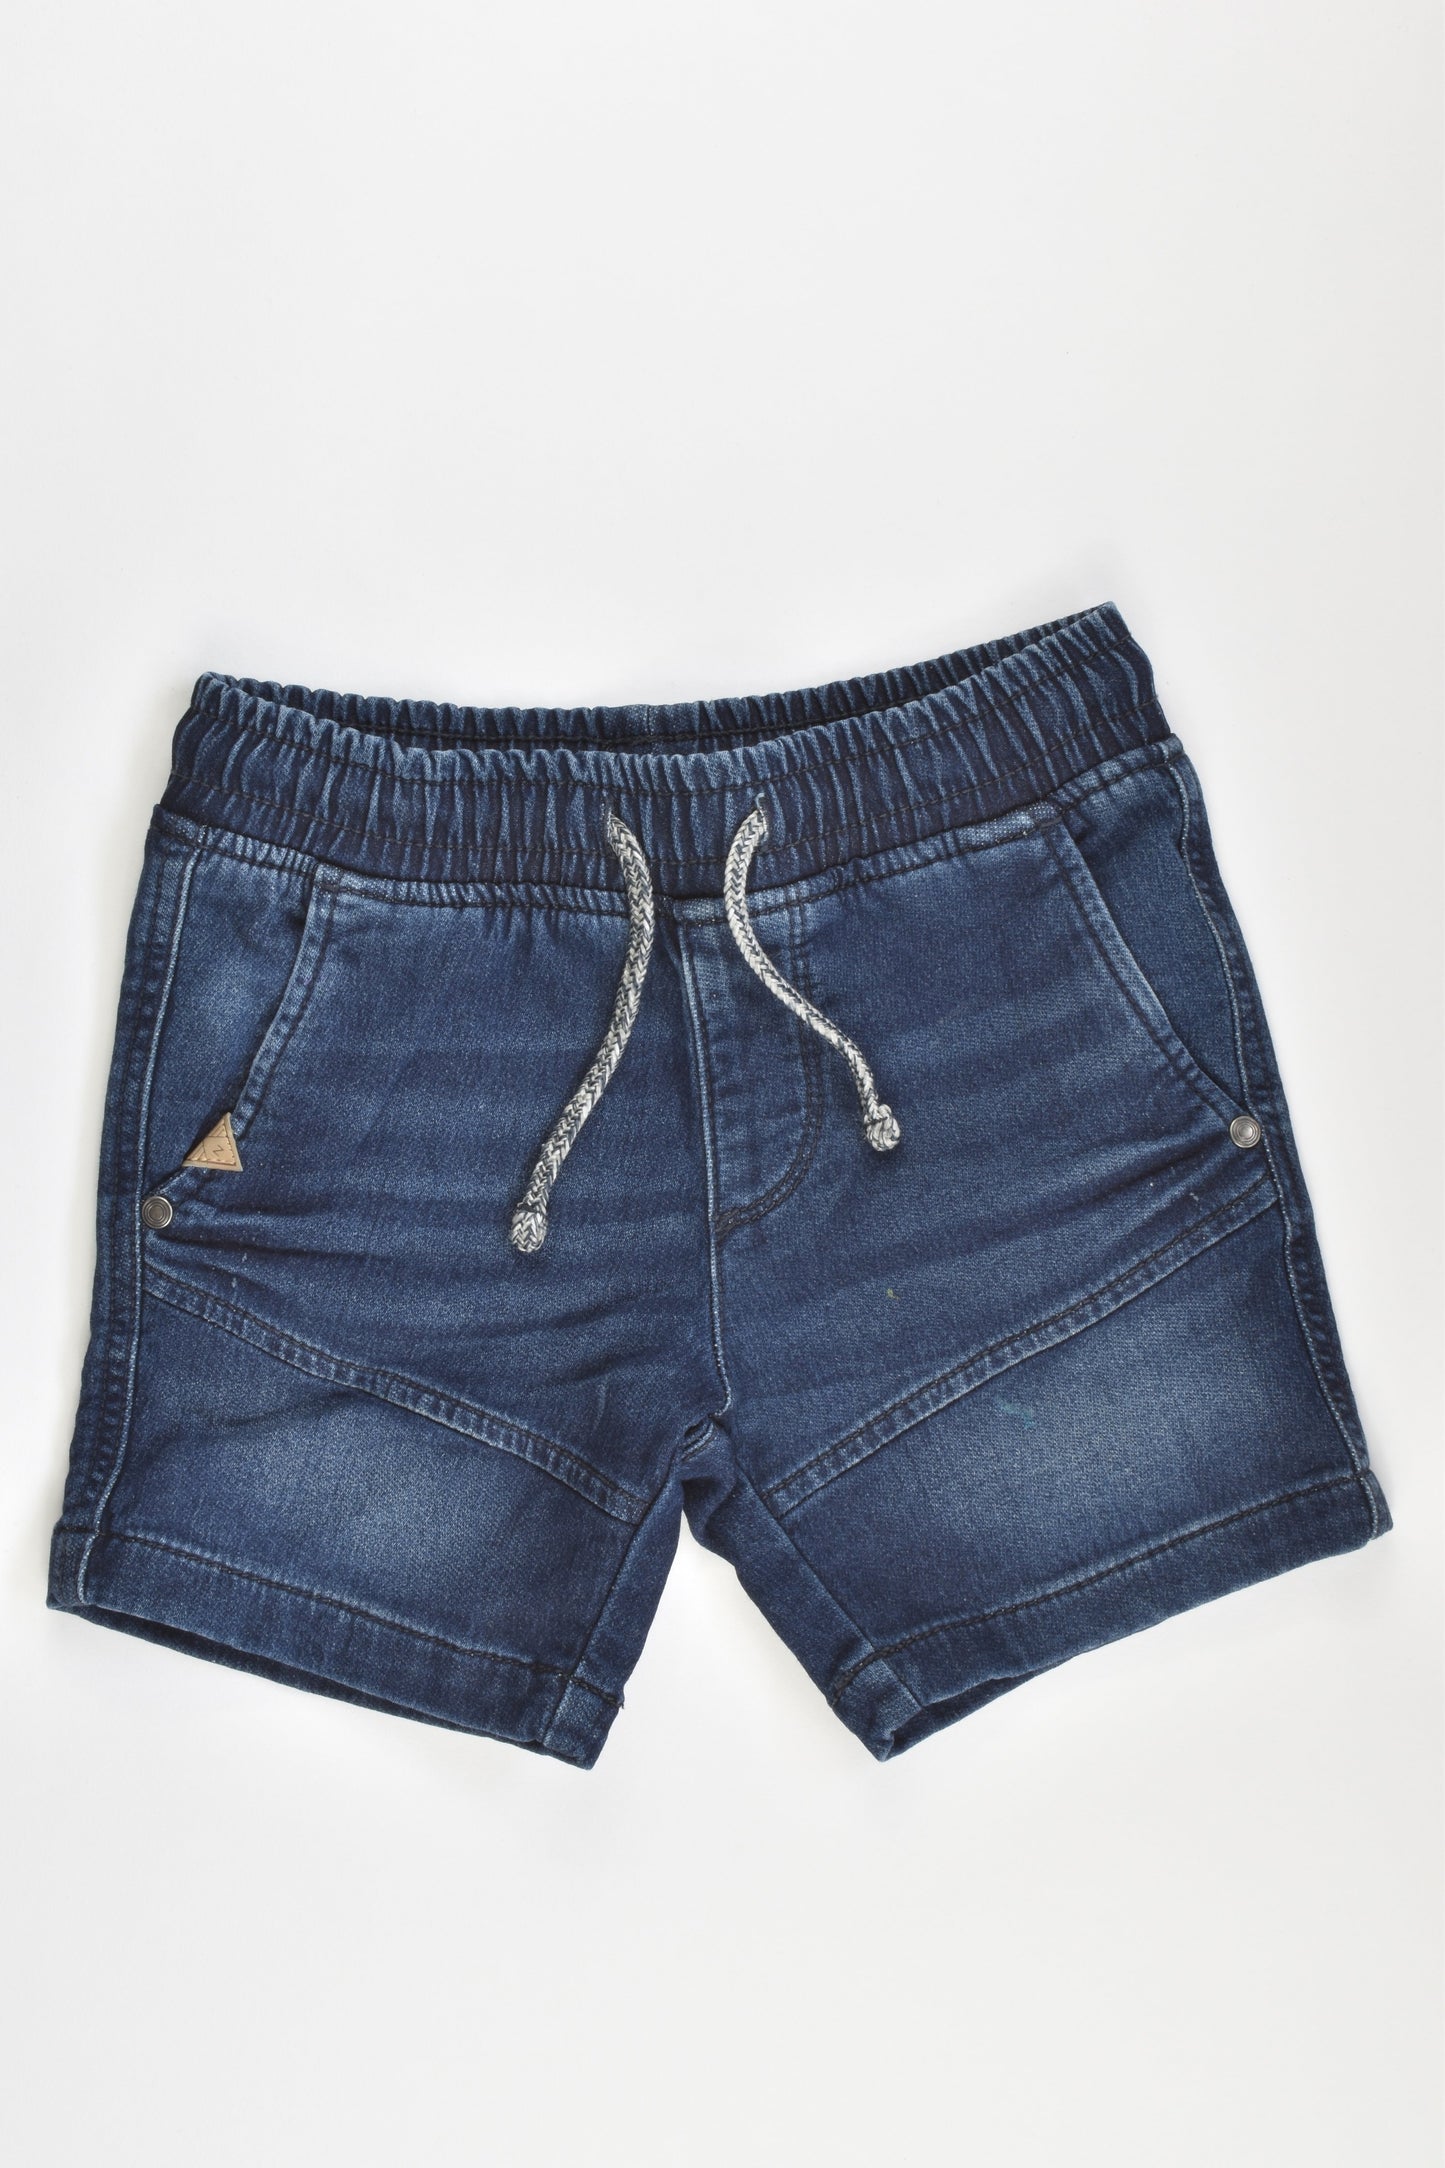 Target Size 3 Stretchy and Soft Denim Shorts